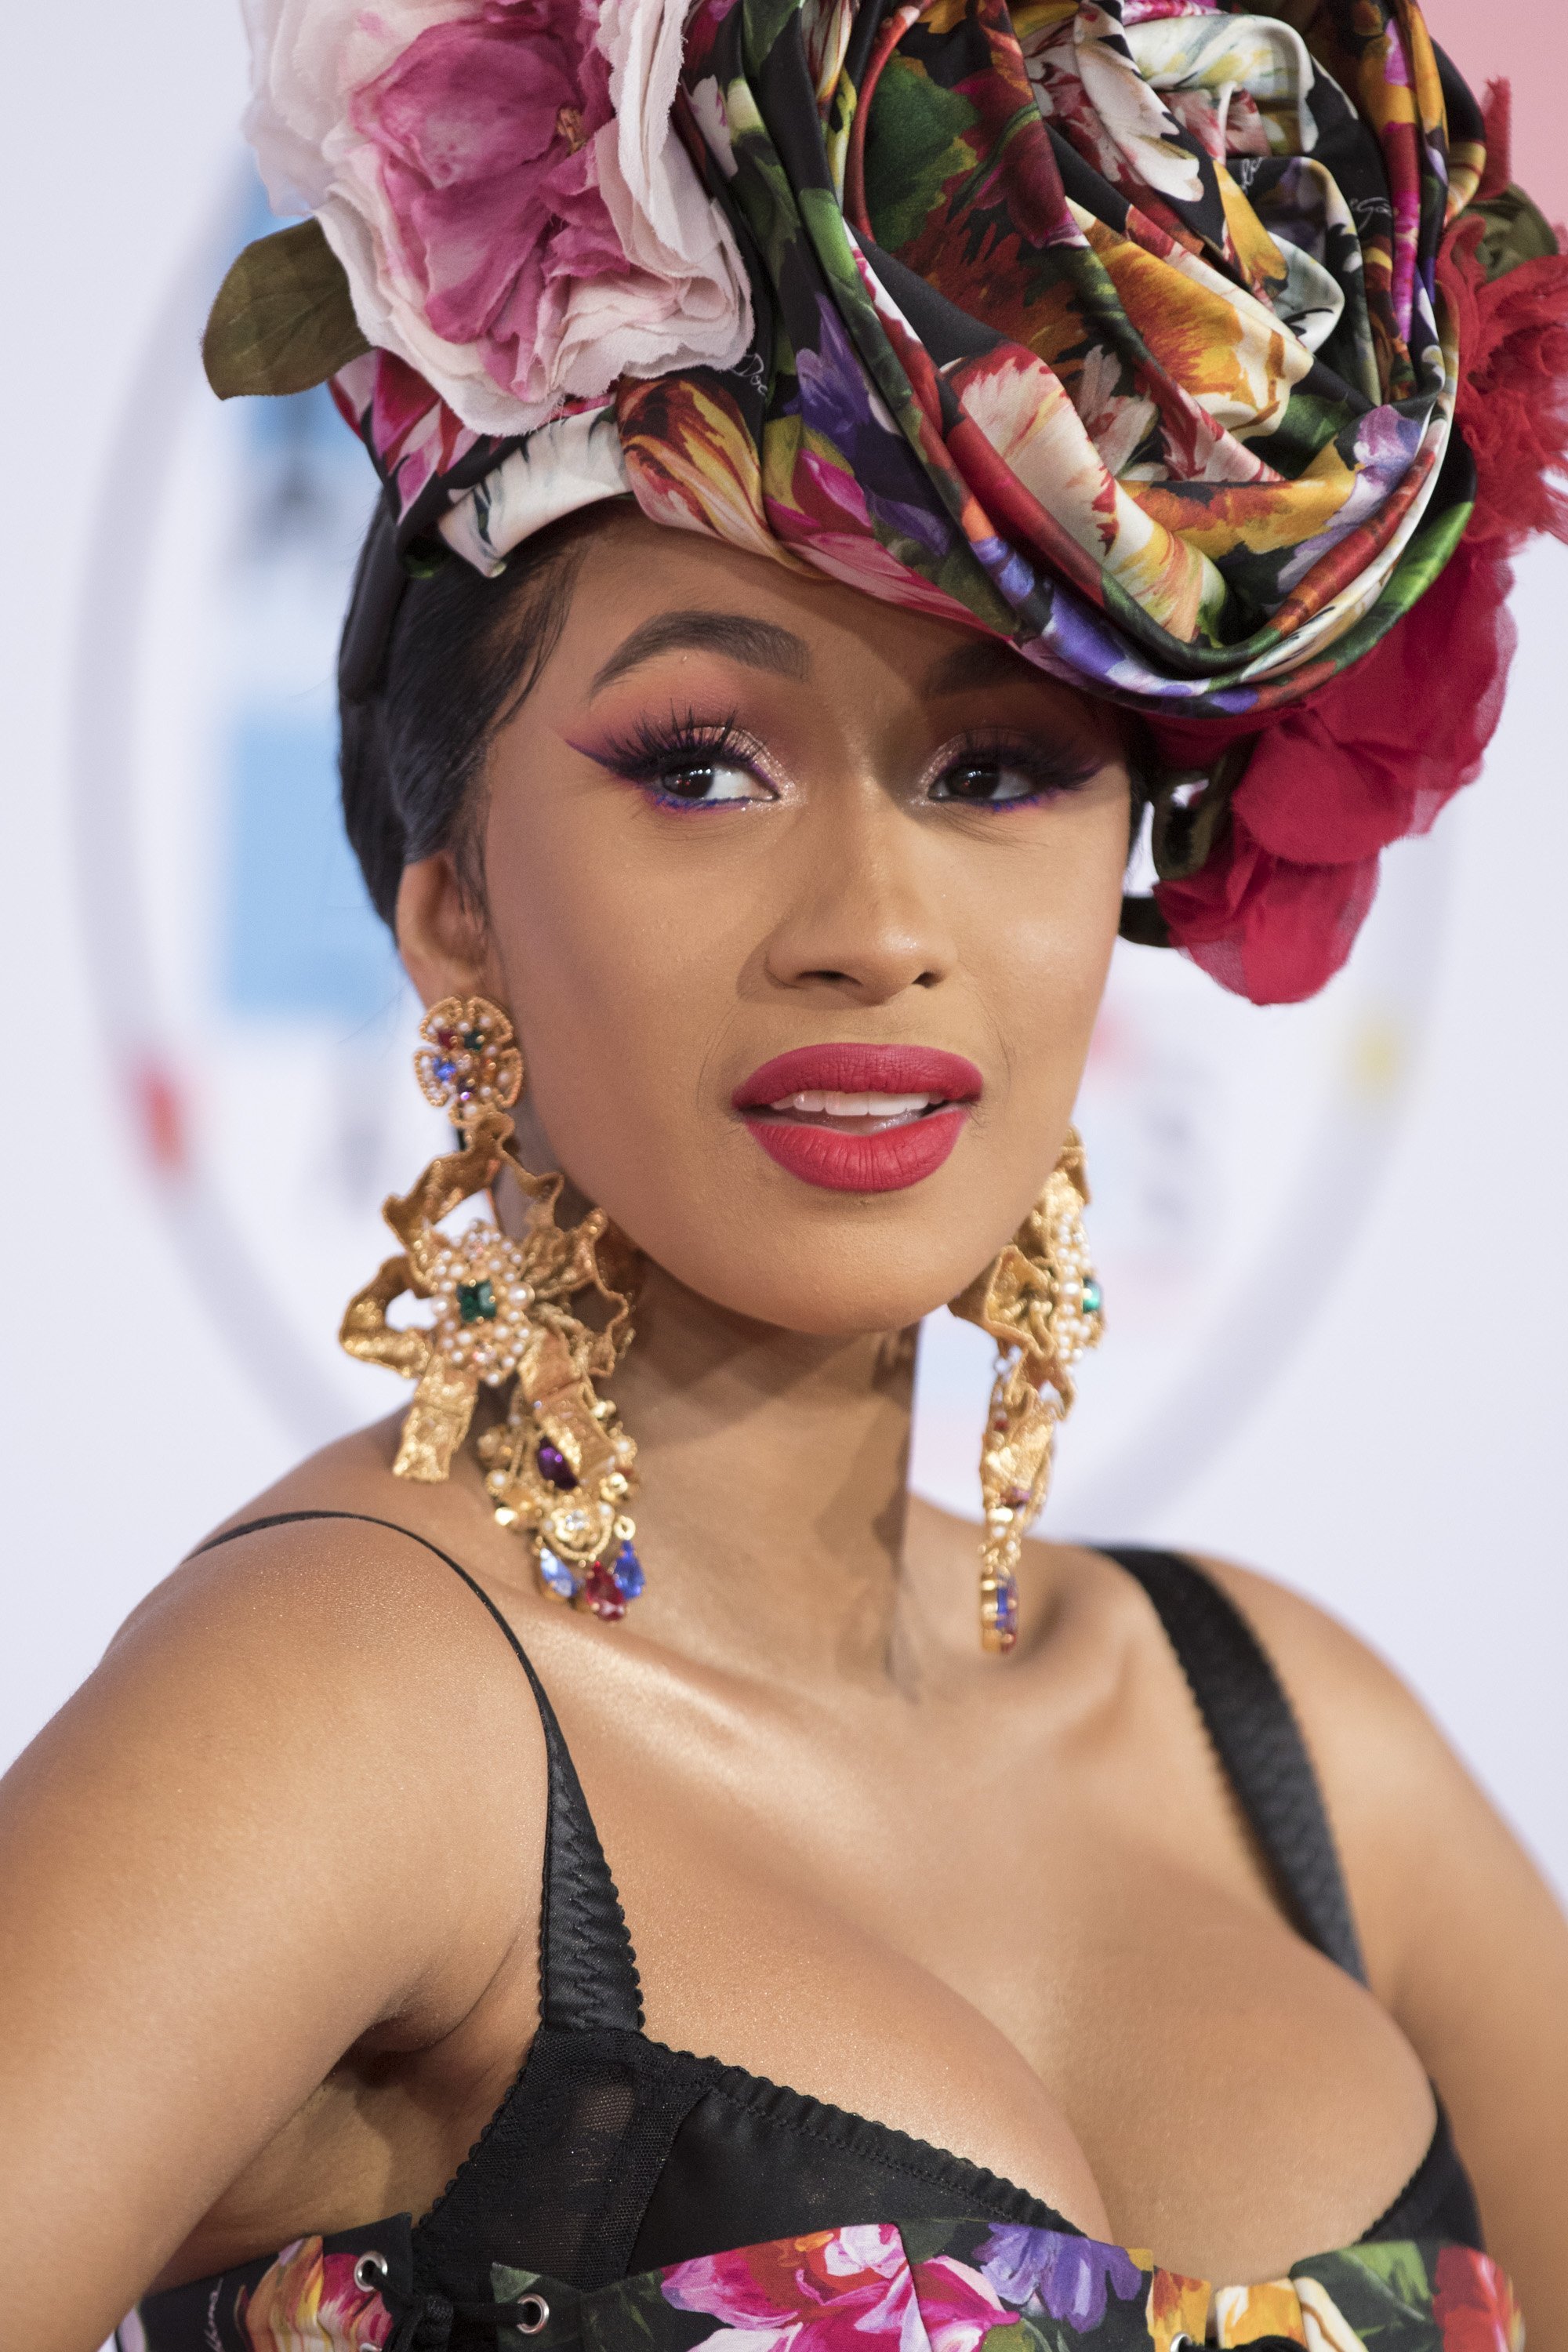 Cardi B’s Money Moves and Political Views